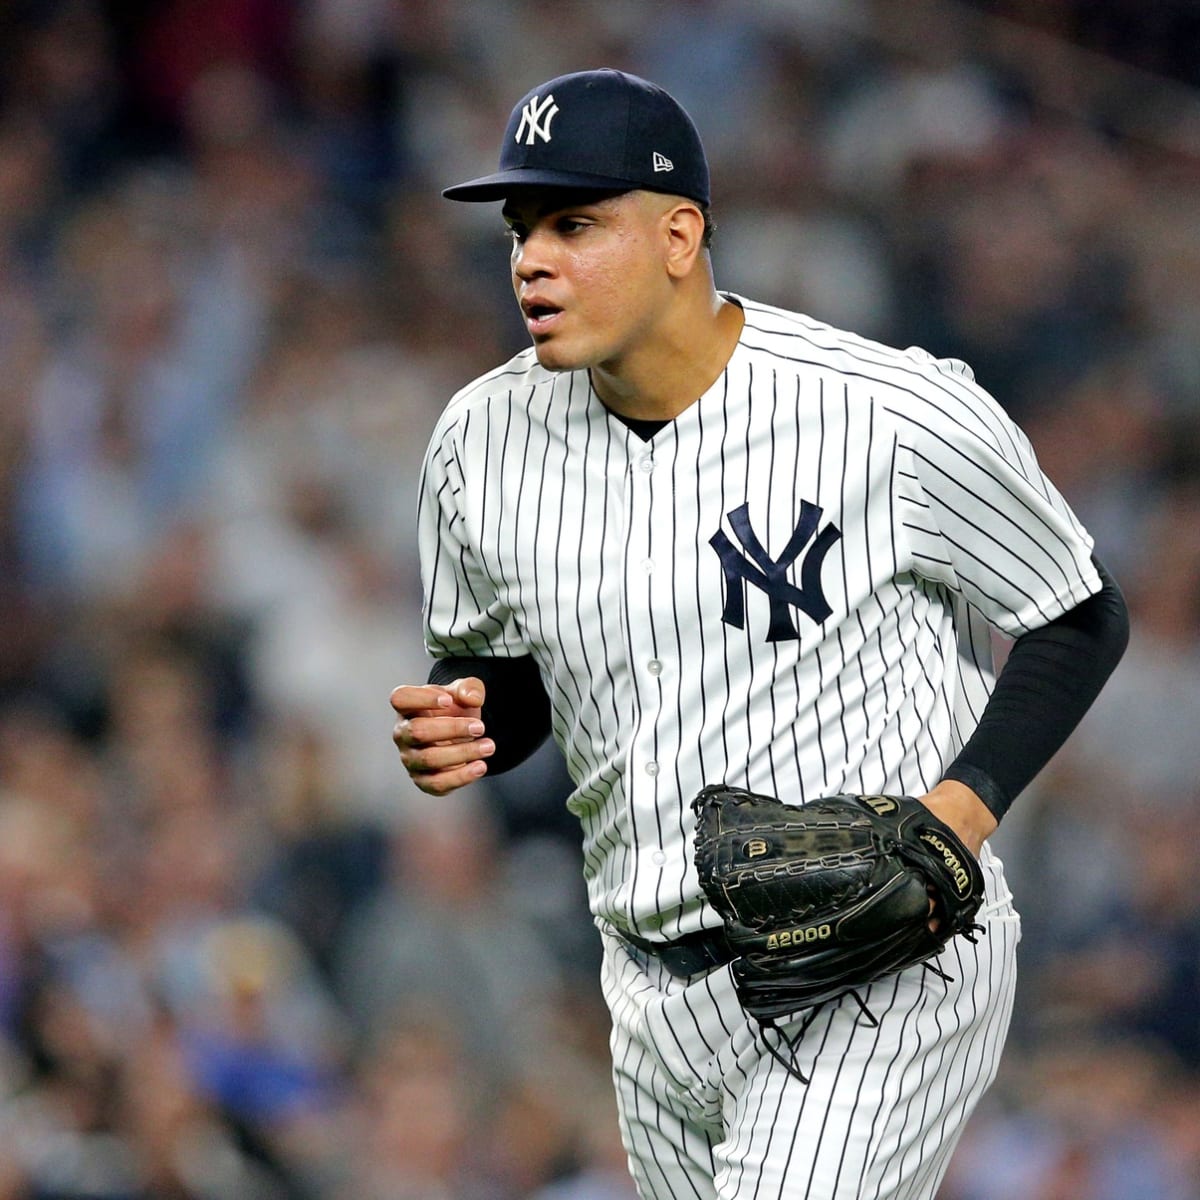 NY Yankees spring training: Dellin Betances late, wife gives birth